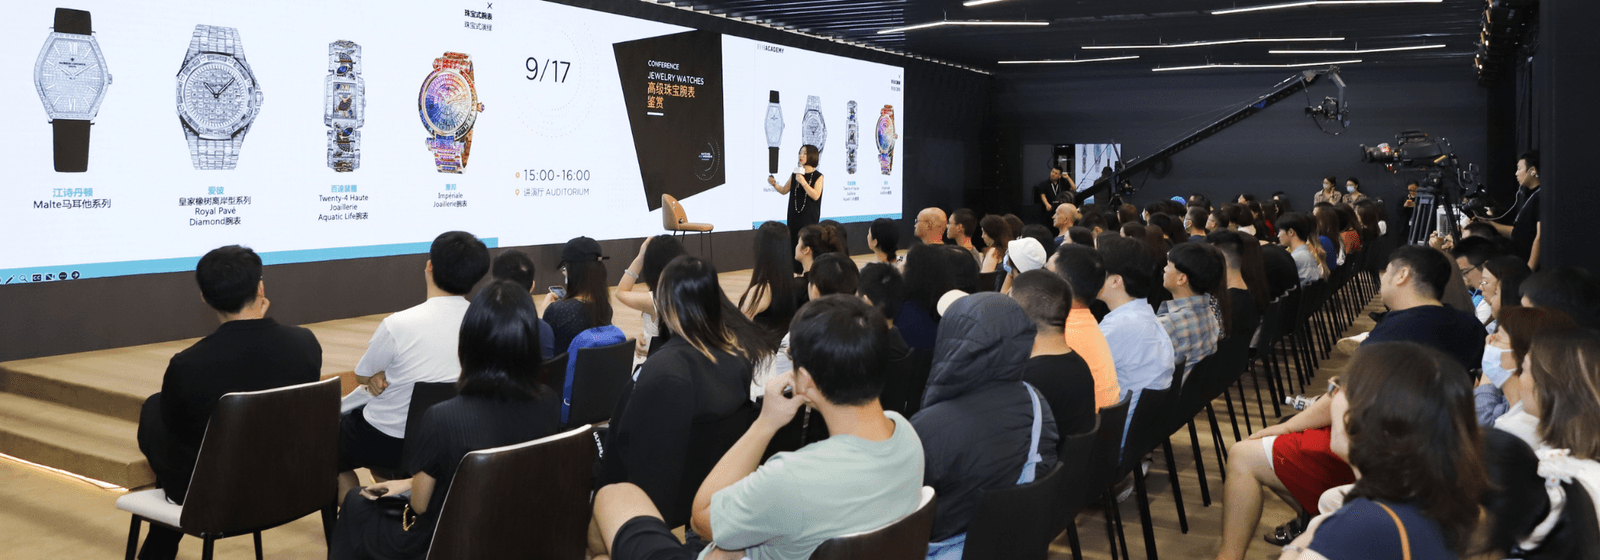 Watches And Wonders Shanghai: The Excitement of Fine Watchmaking Shines